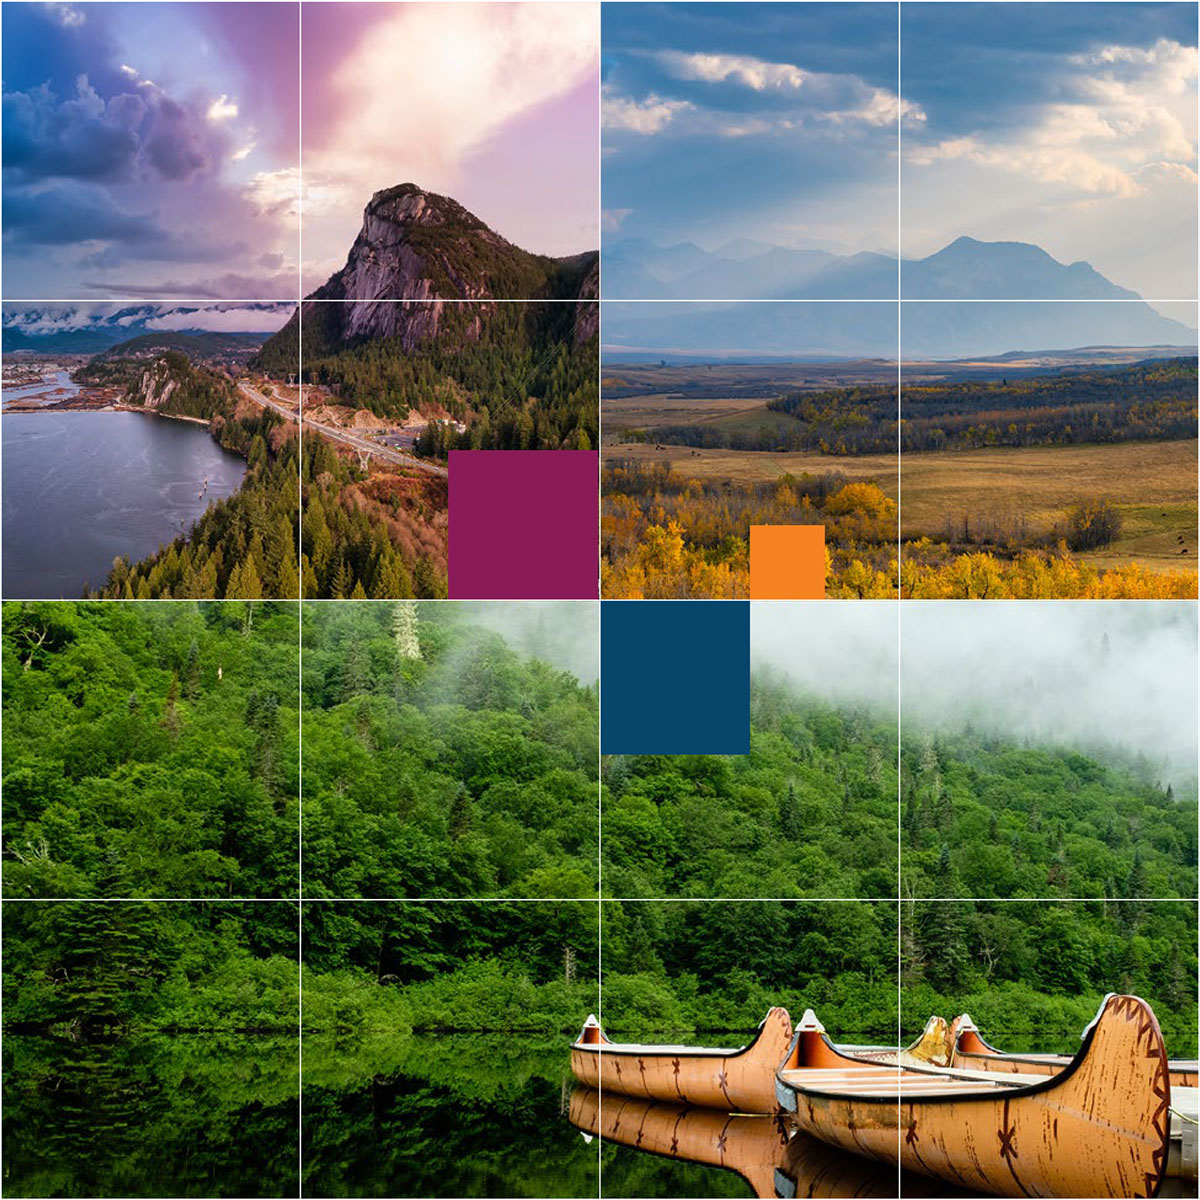 A series of Canadian landscapes including mountains, ocean, lakes, and a canoe.